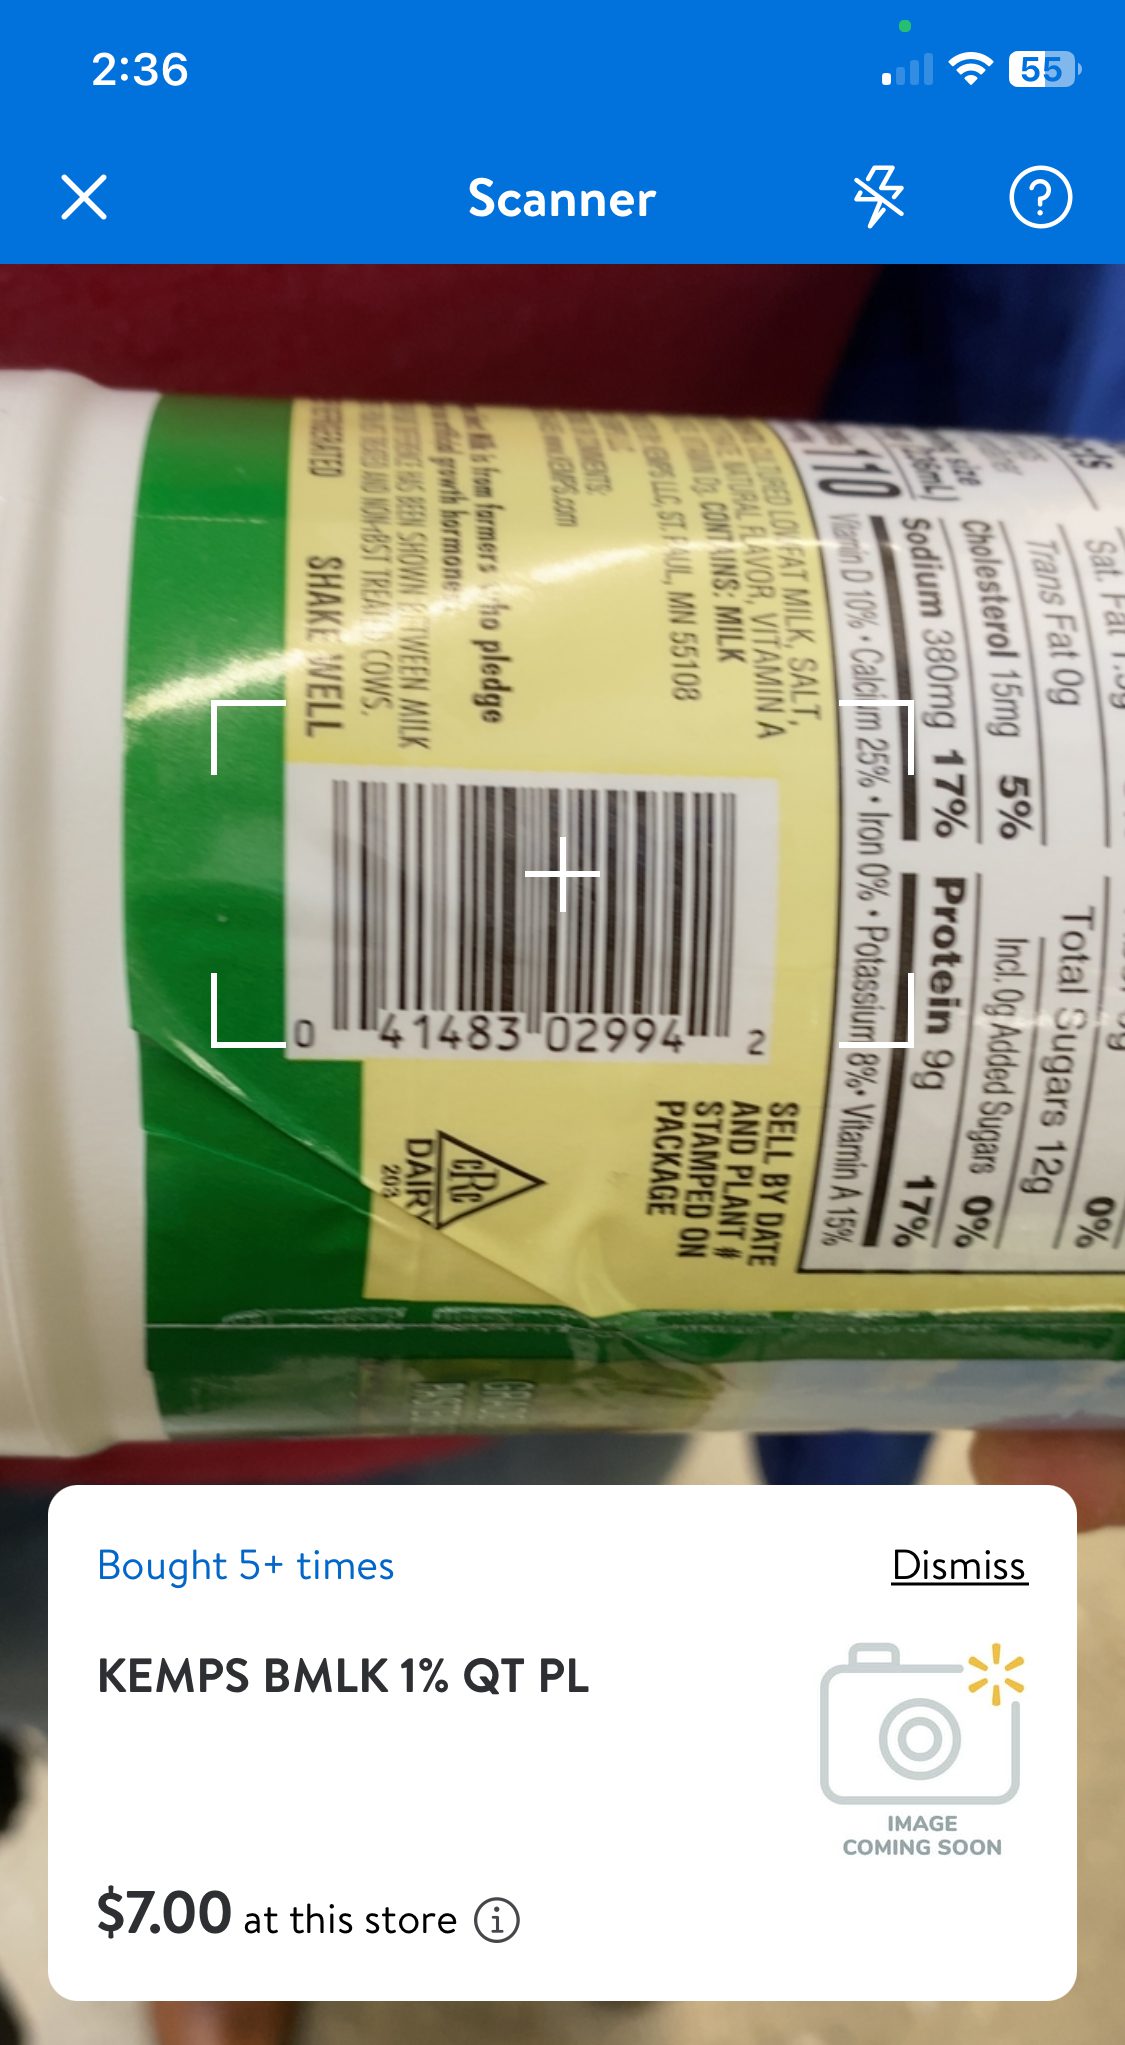 Walmart mobile app: Price scanner price check on a quart of buttermilk: $7